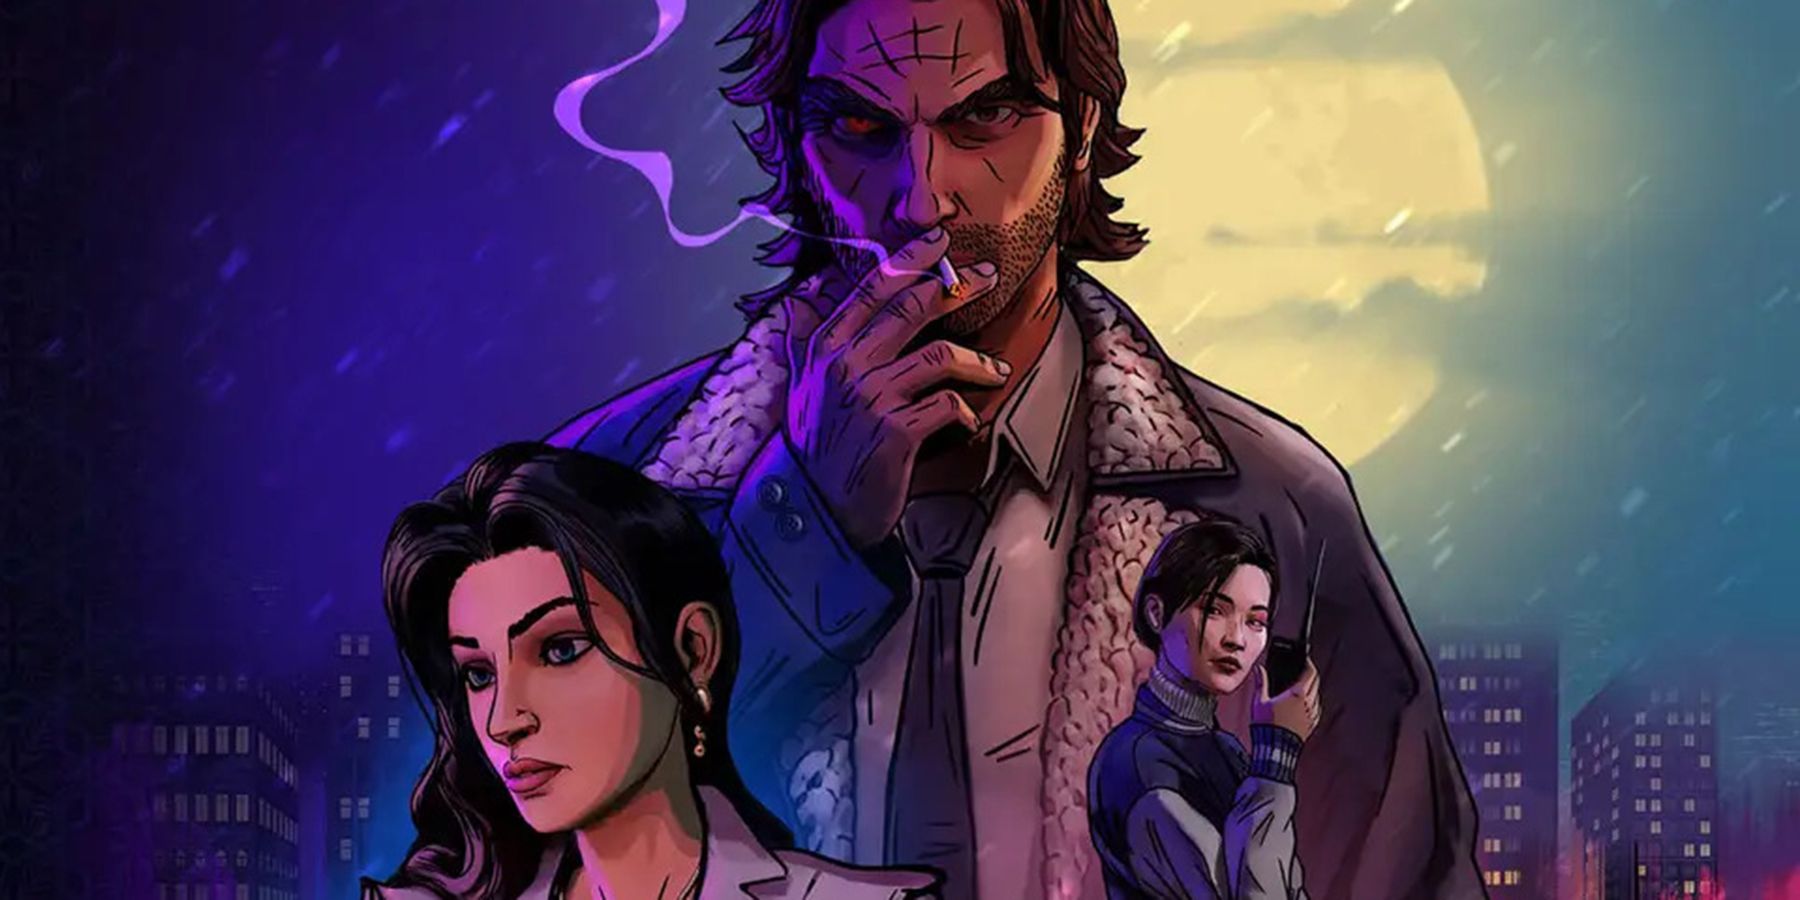 thw wolf among us 2 new trailer